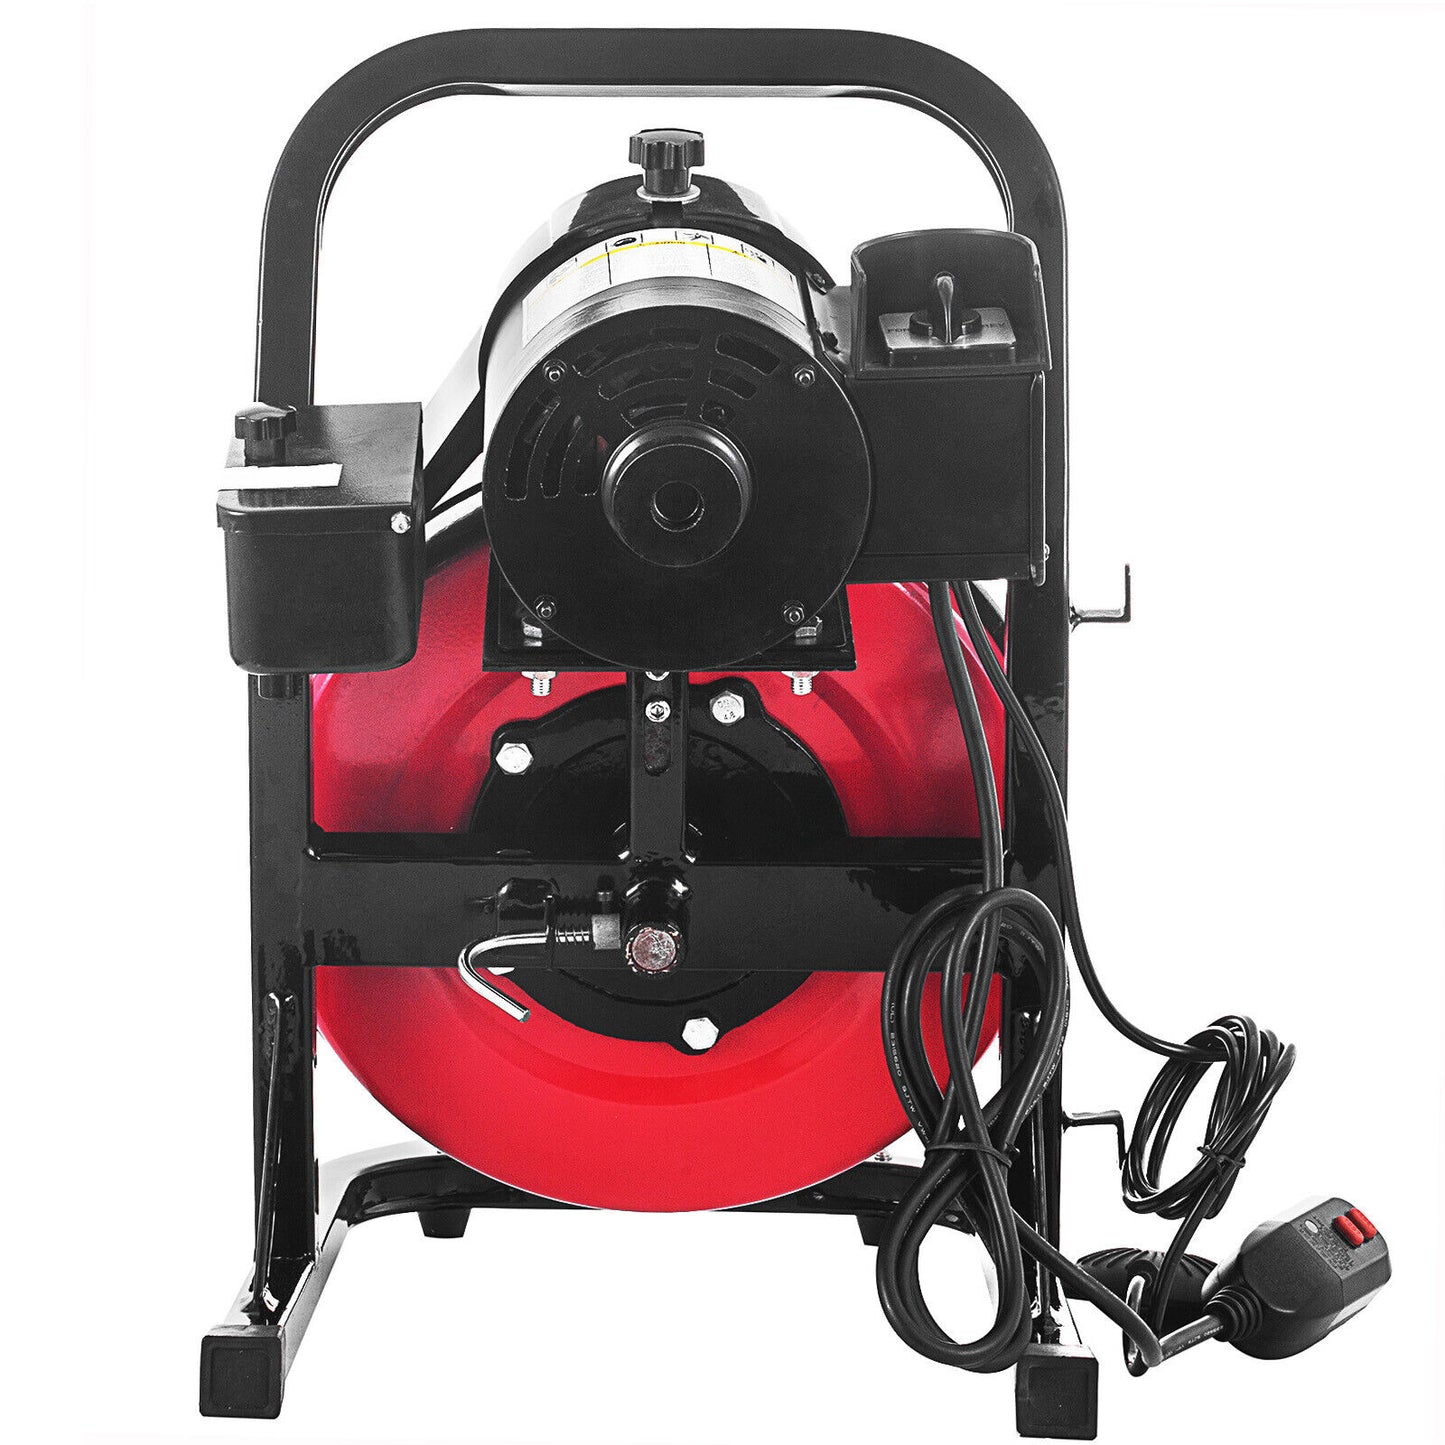 Sewer Snake Drill Drain Auger Cleaner 50ftx1/2'' Electric Drain Cleaning Machine